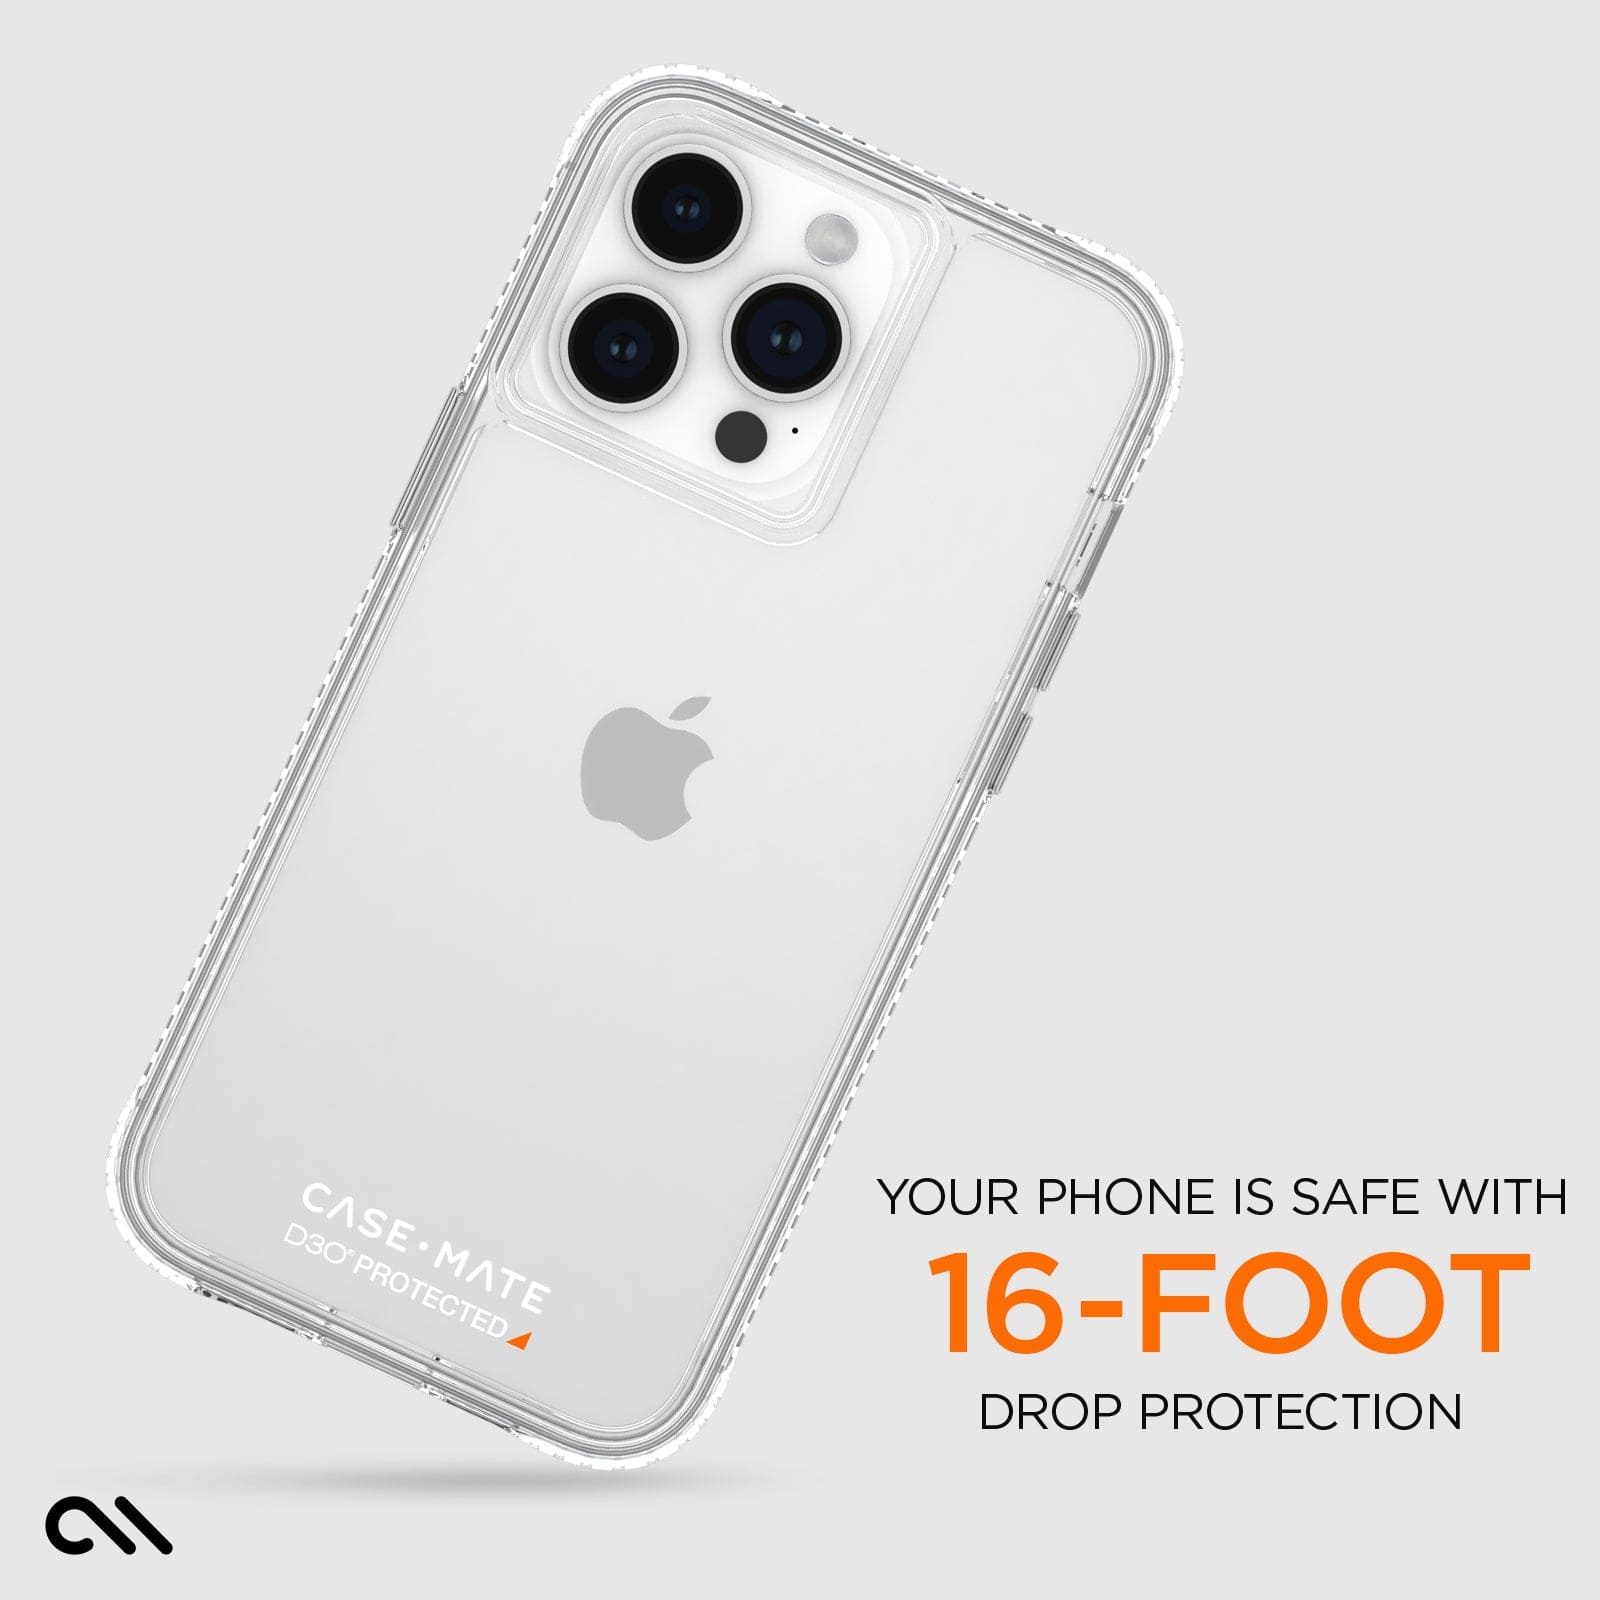 YOUR PHONE IS SAFE WITH 16 FOOT DROP PROTECTION